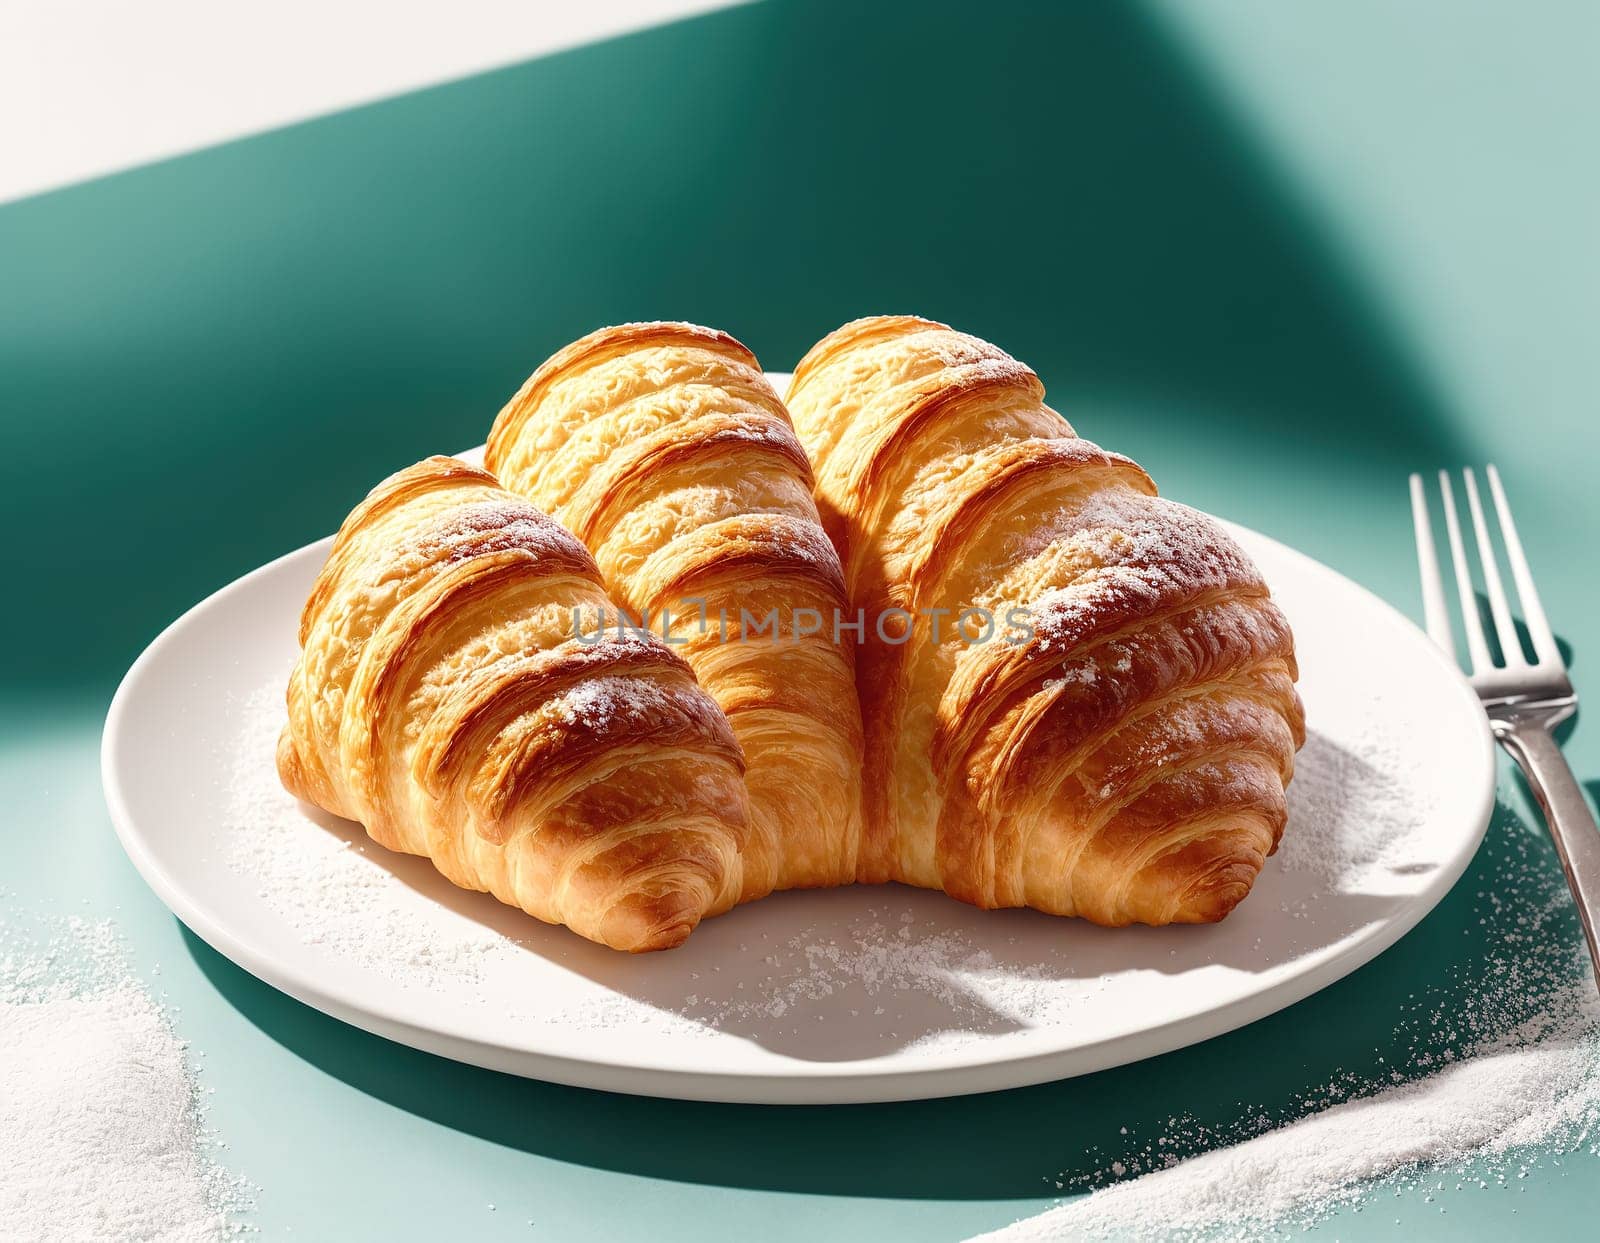 The image shows a plate of croissants on a white plate with a fork and knife next to it.